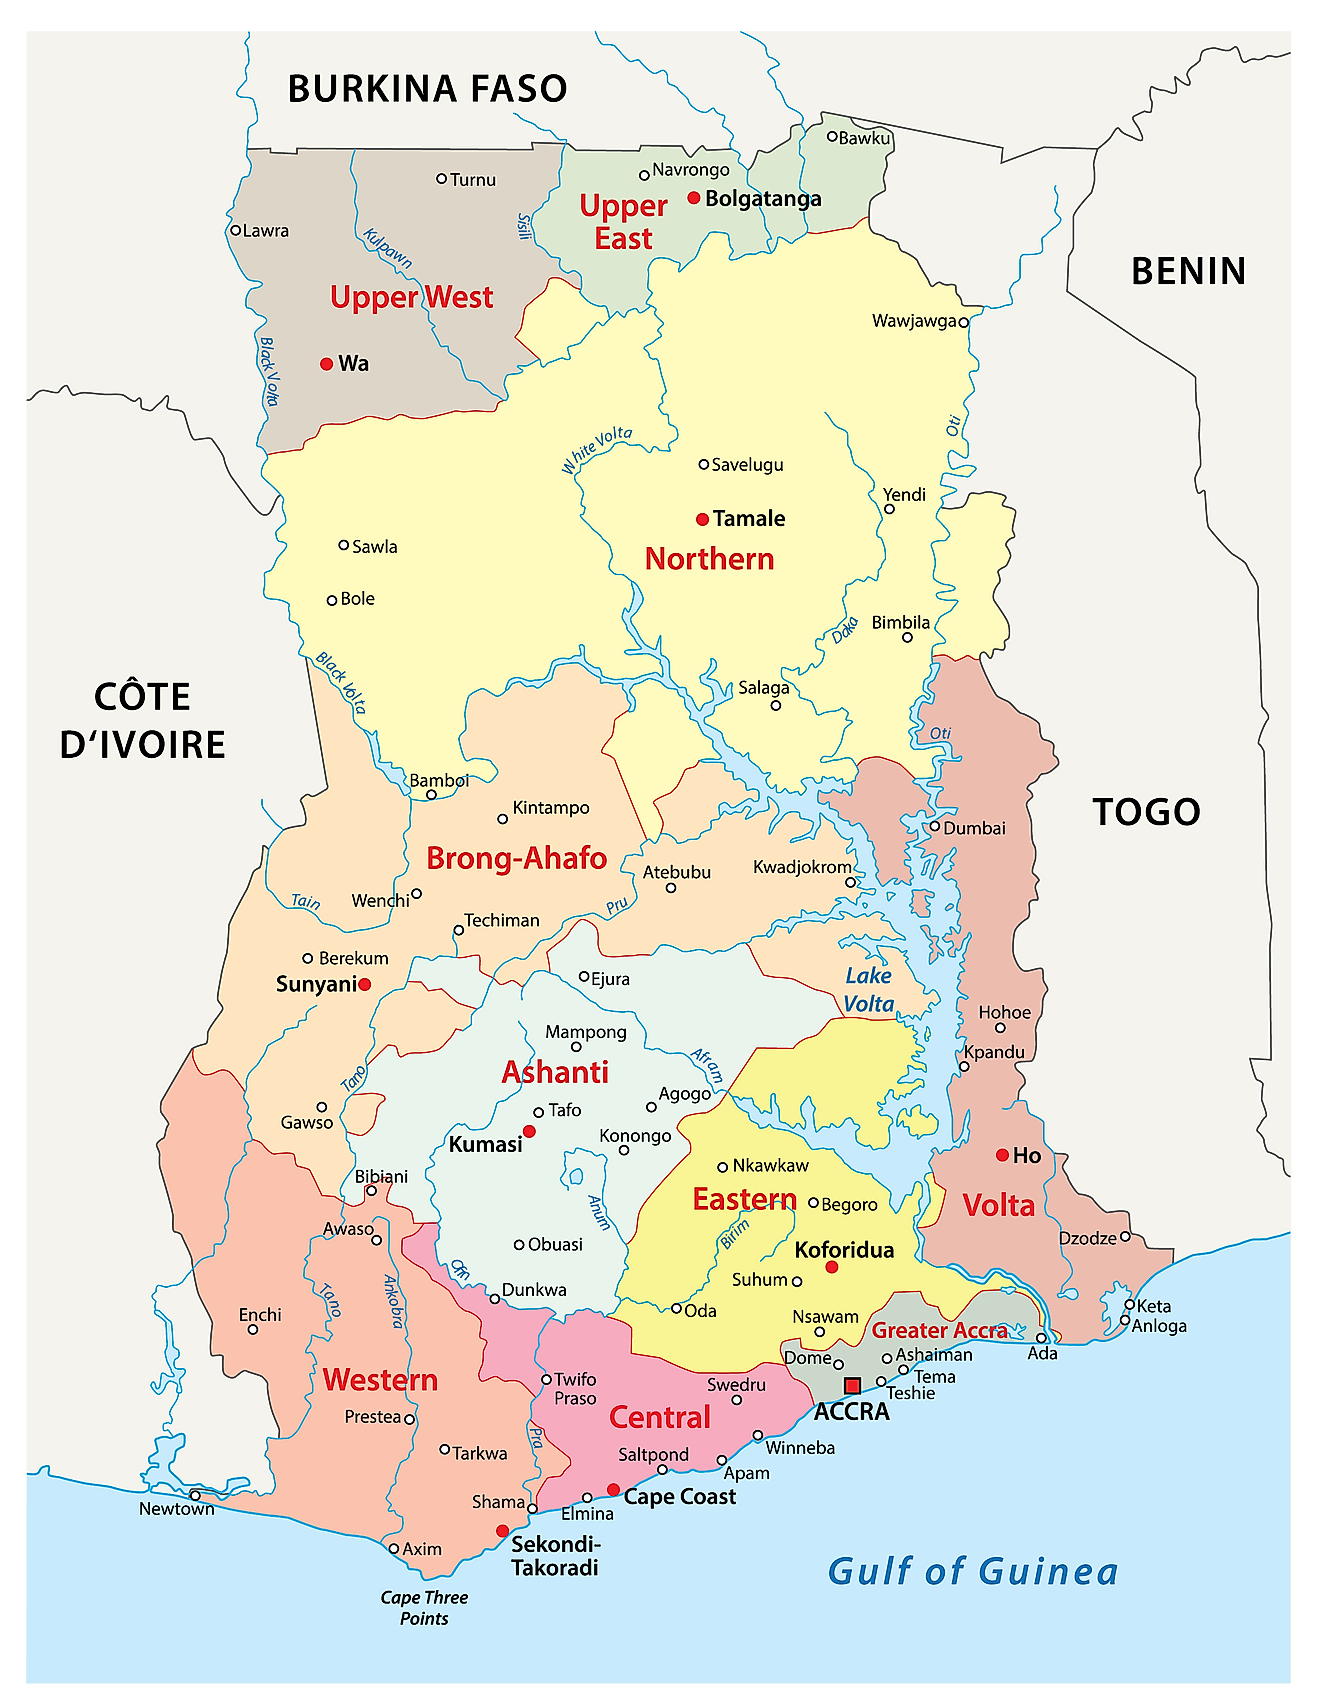 Map of Ghana showing major rivers and water bodies in Ghana